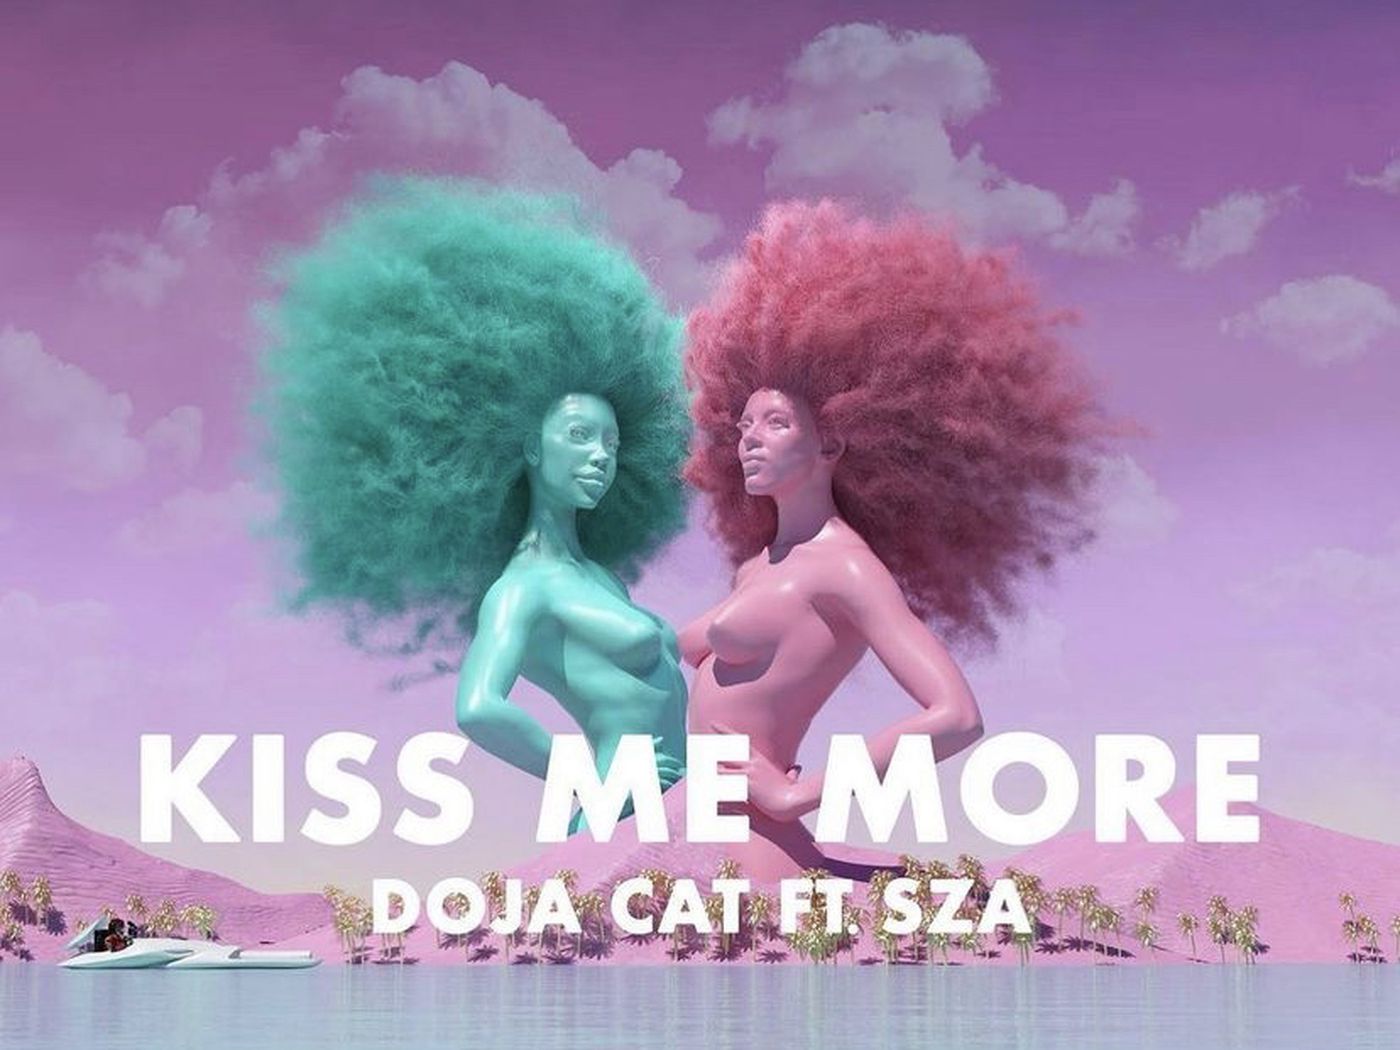 SZA teams up with Doja Cat for new single “Kiss Me More”